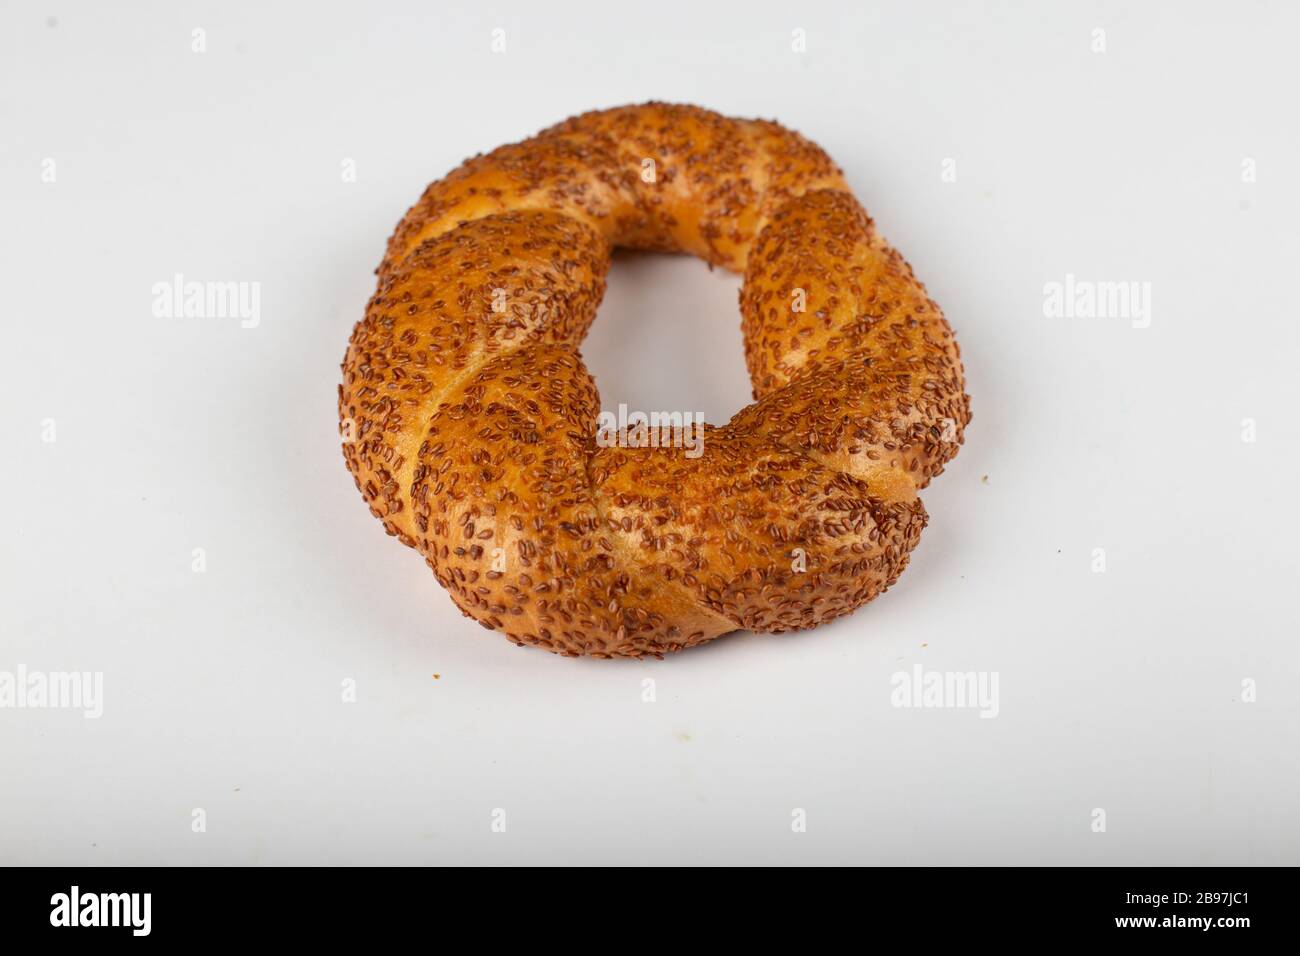 Bagel on table with white background Stock Photo